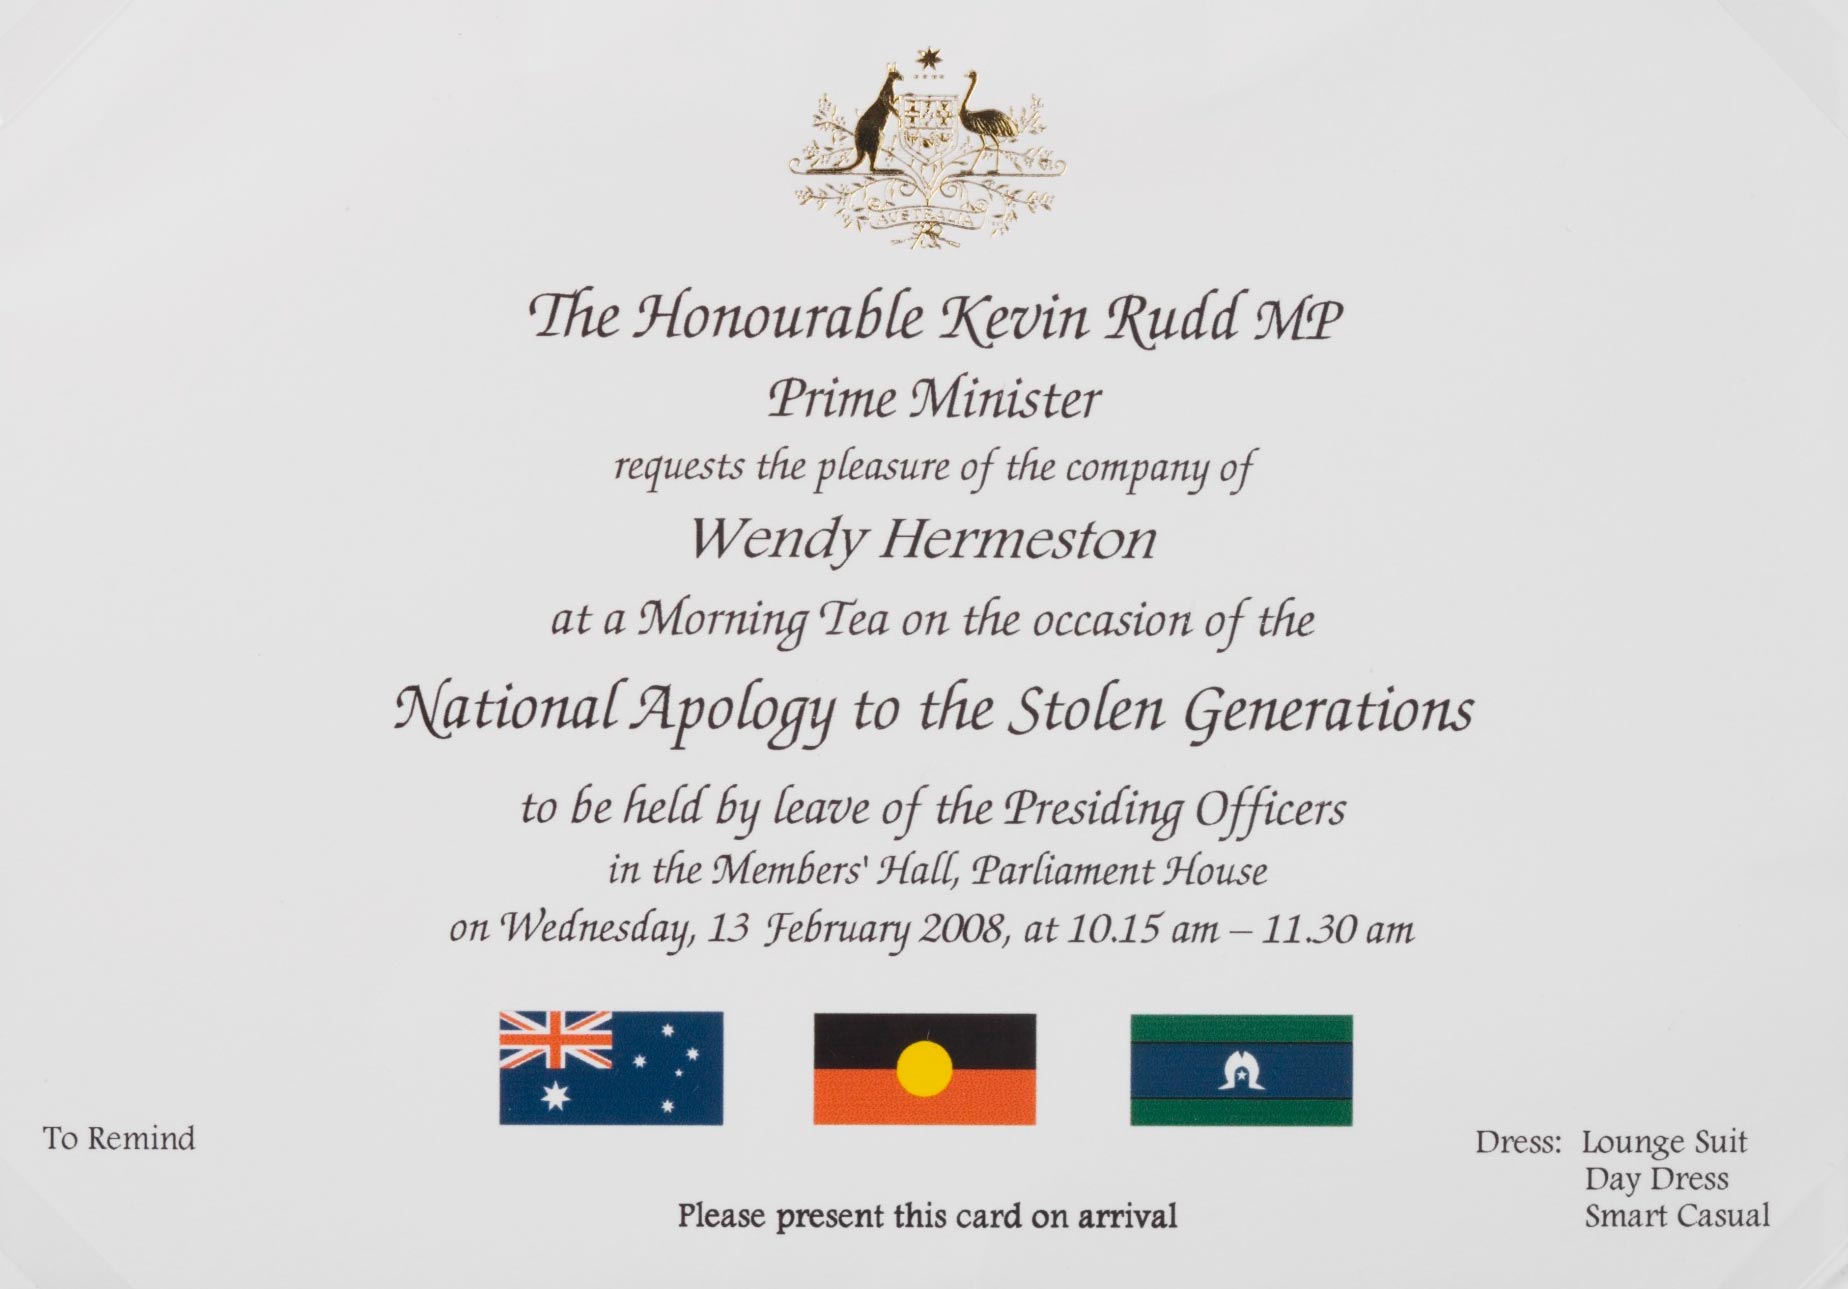 Invitation to former Link-Up (NSW) caseworker Wendy Hermeston from Prime Minister Kevin Rudd, to attend the national apology to the Stolen Generations.